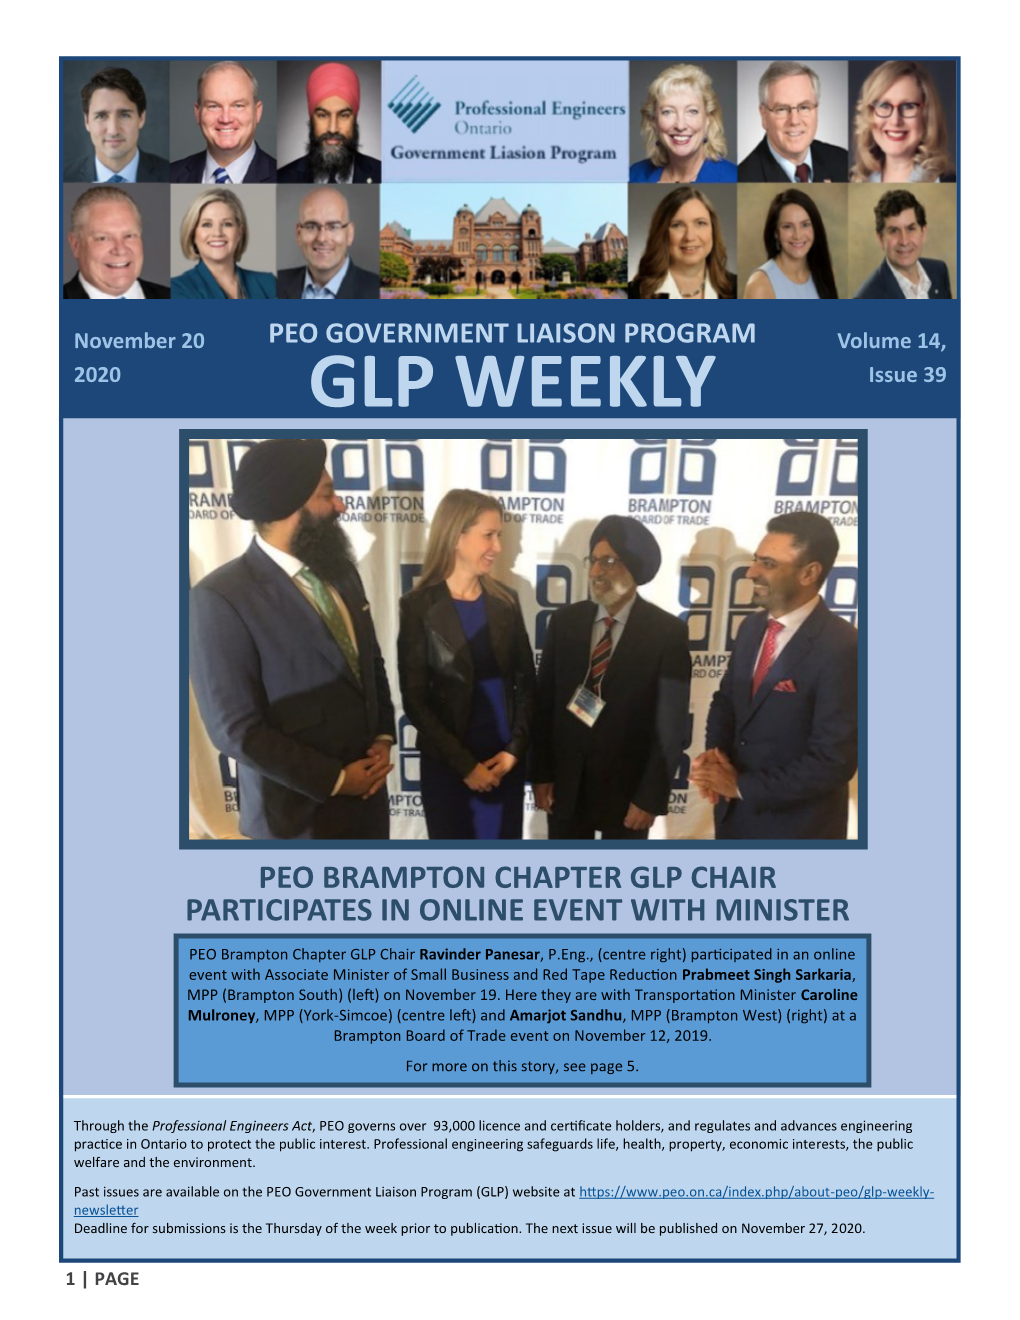 GLP WEEKLY Issue 39